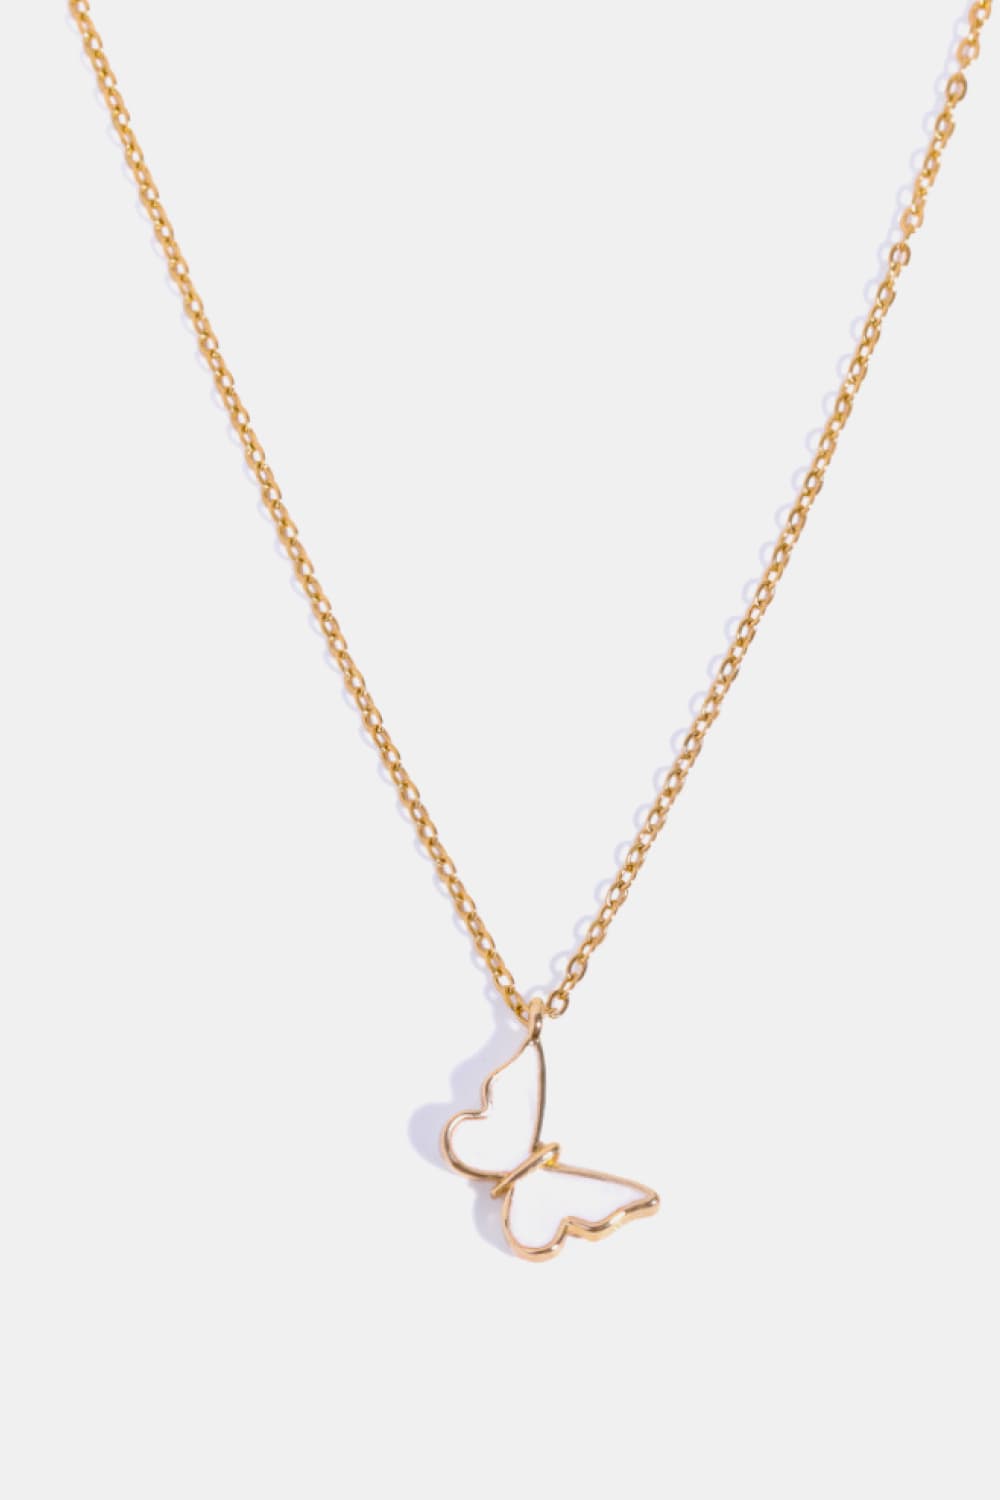 Trendsi Cupid Beauty Supplies White / One Size Women Necklace Butterfly Pendant Copper 14K Gold-Plated Necklace